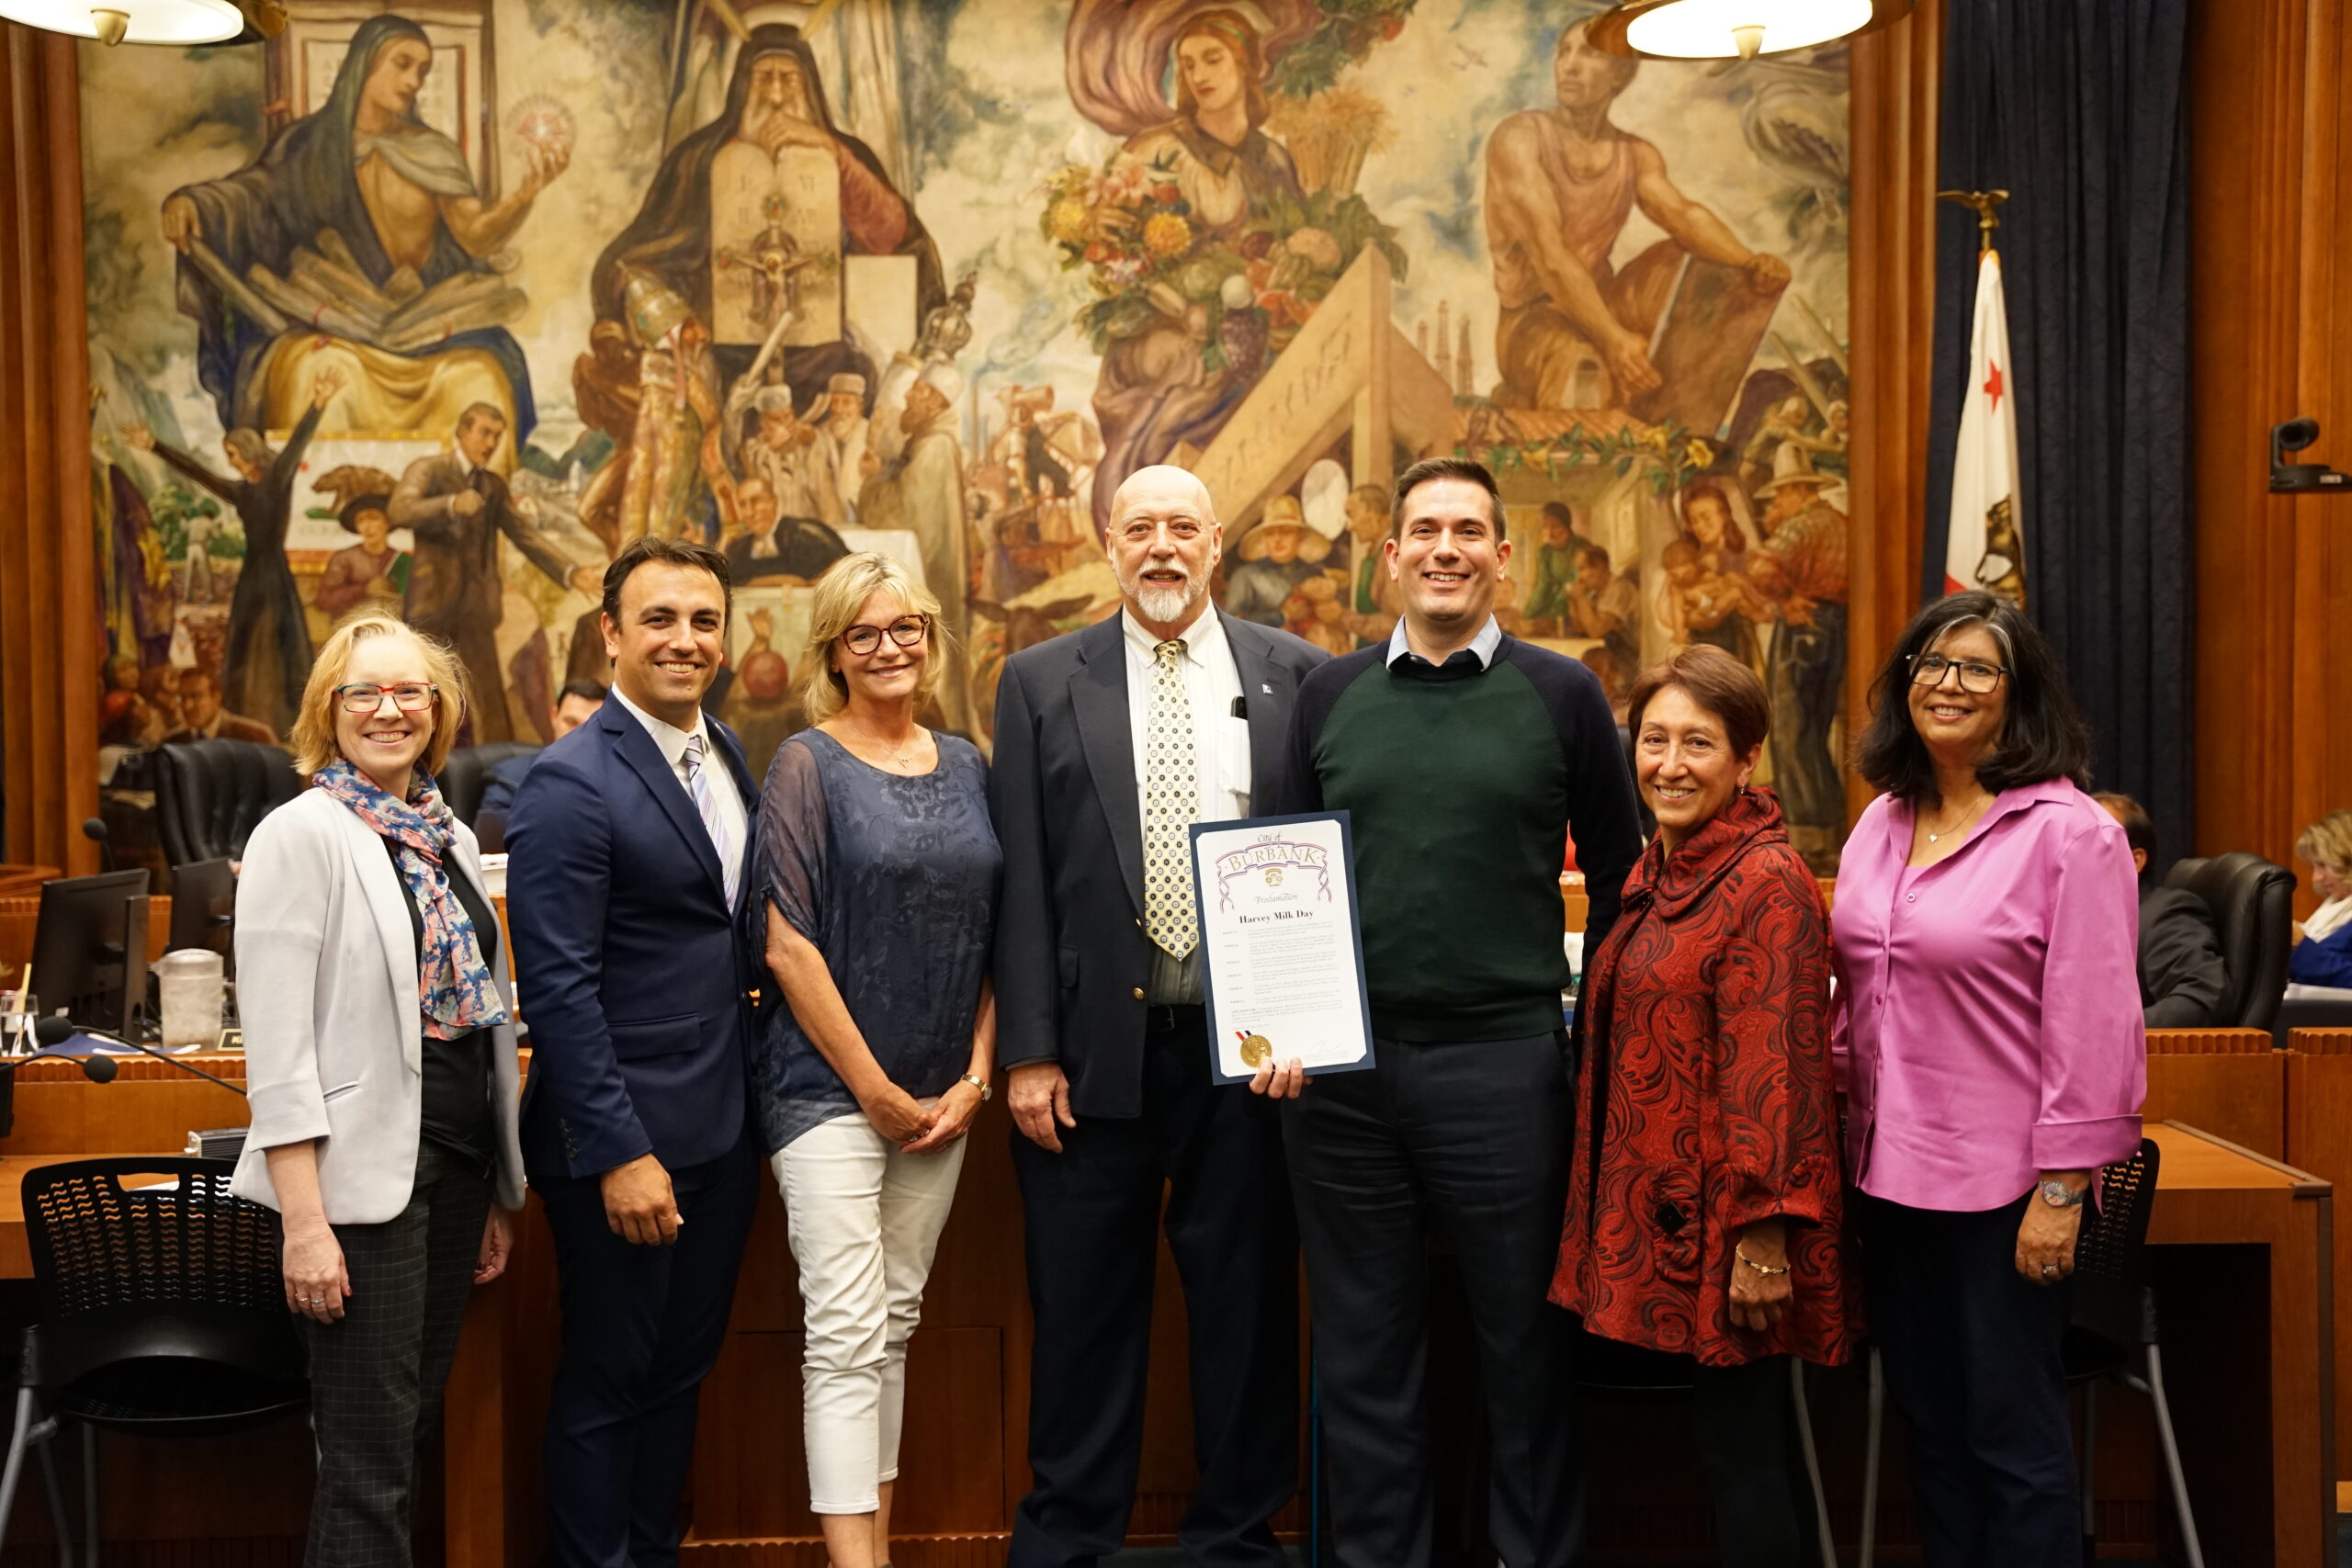 May 22, 2023 Declared Harvey Milk Day in the City of Burbank